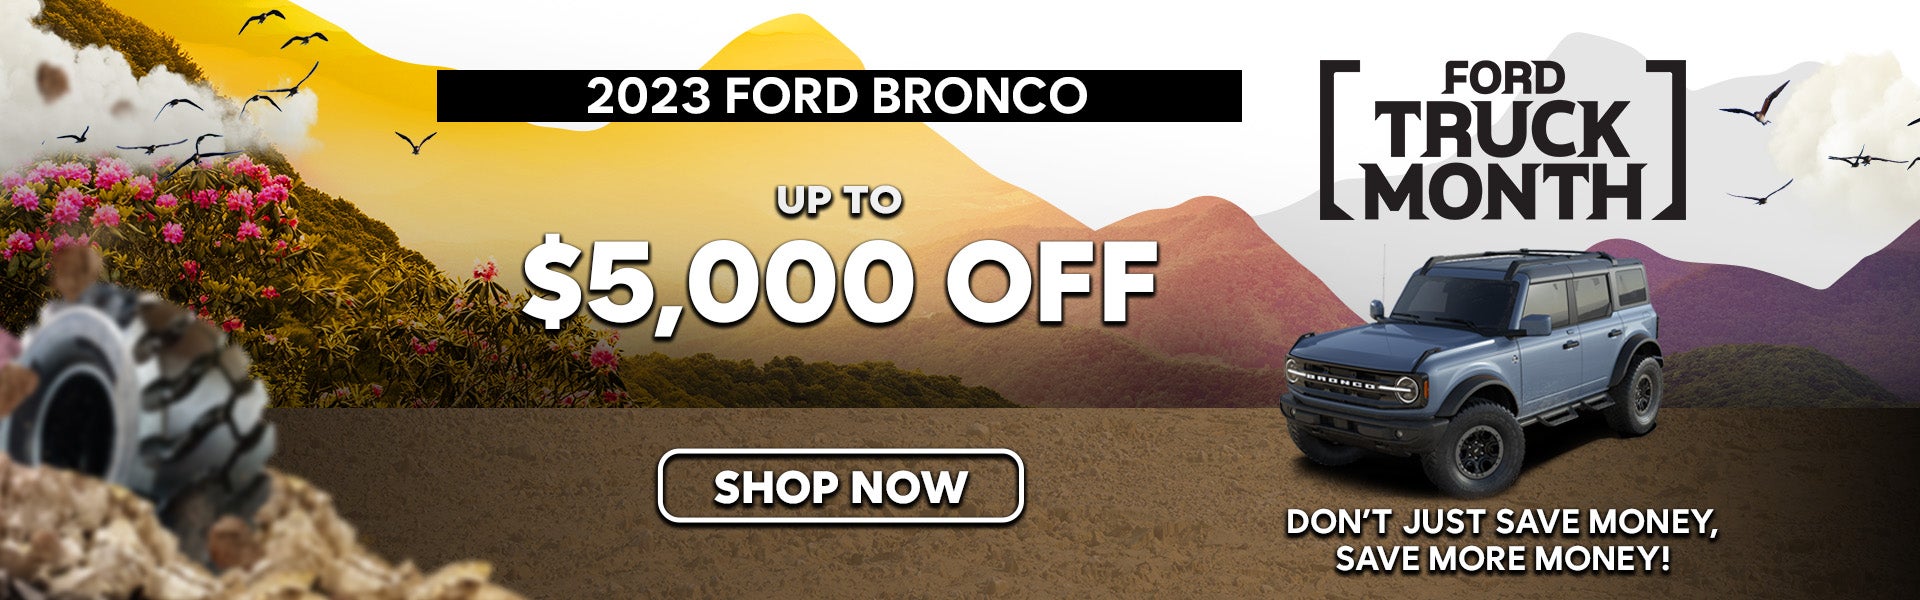 2023 Ford Bronco Special Offer